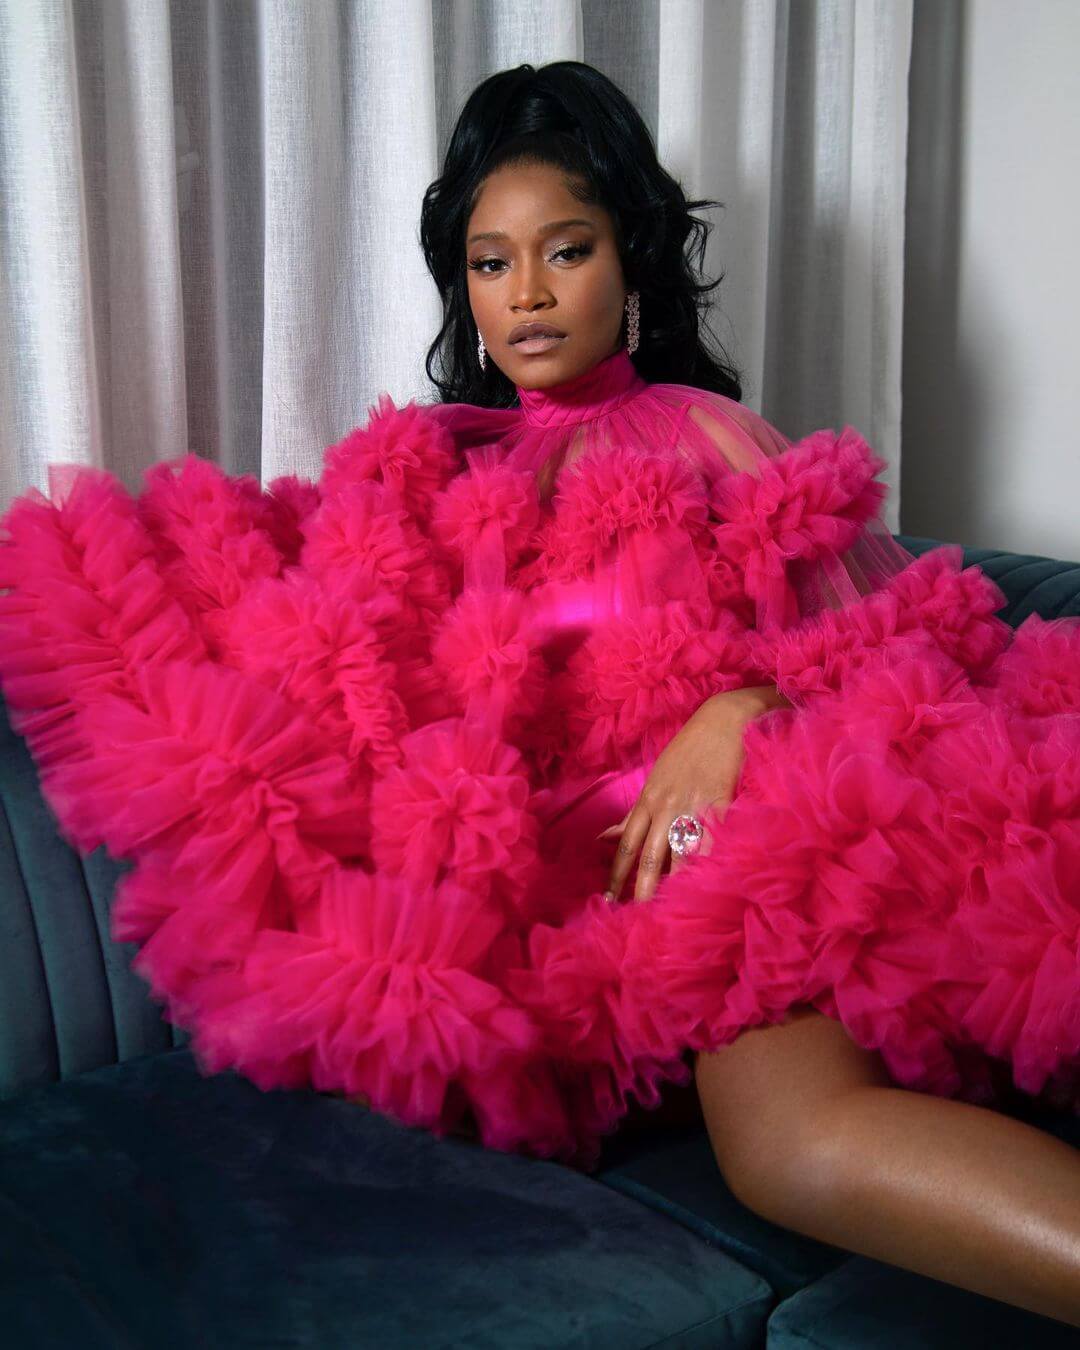 Just Barbie Things -Keke Palmer Is A Sight To Watch In A Pink Tulle Number